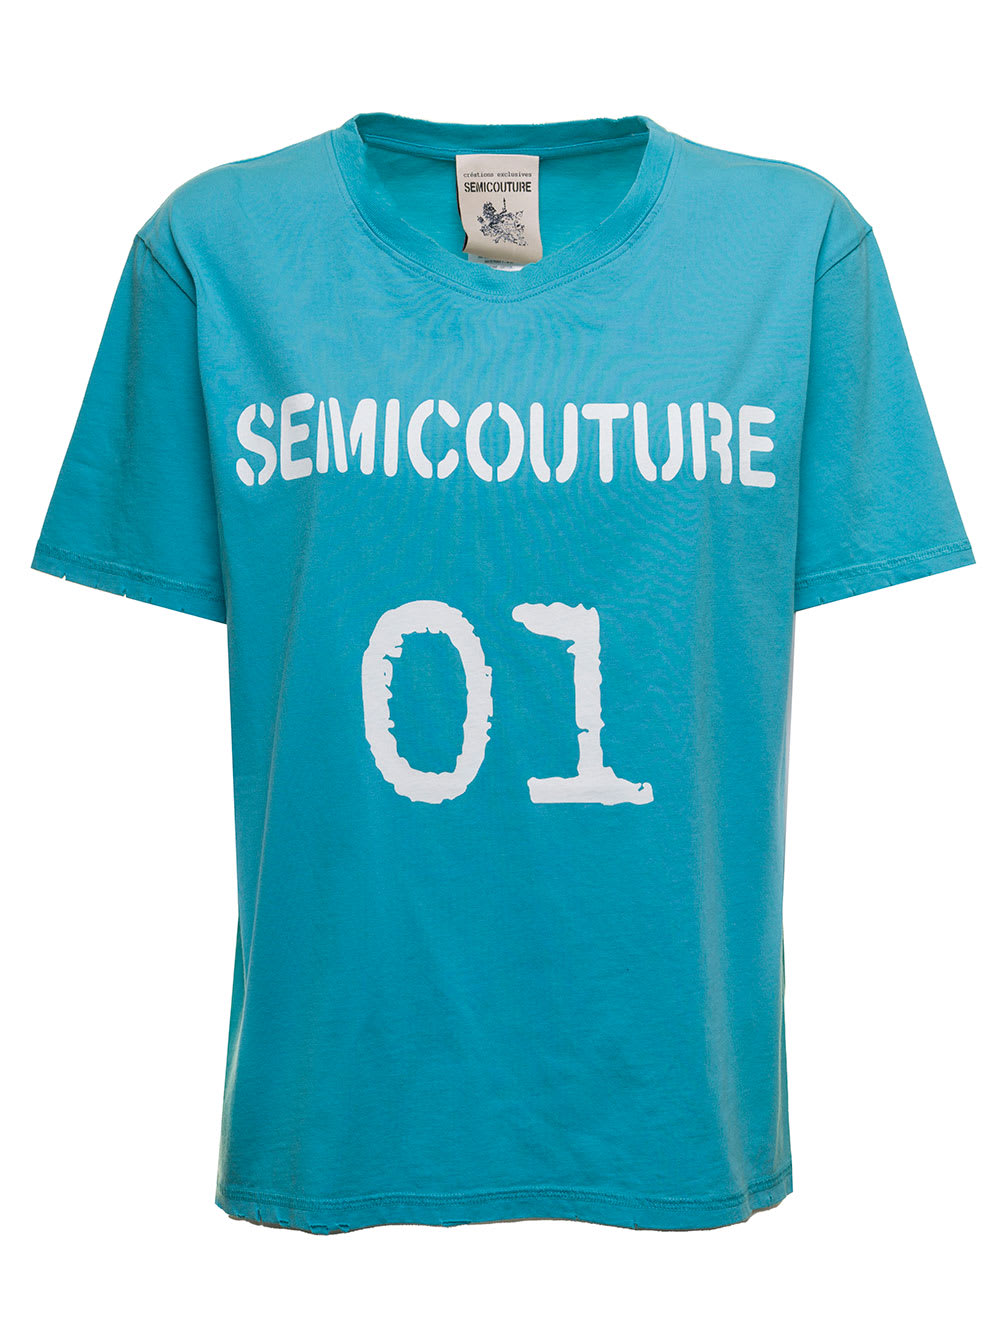 SEMICOUTURE SEMICOUTURE WOMANS LIGHT BLUE COTTON T-SHIRT WITH LOGO PRINT